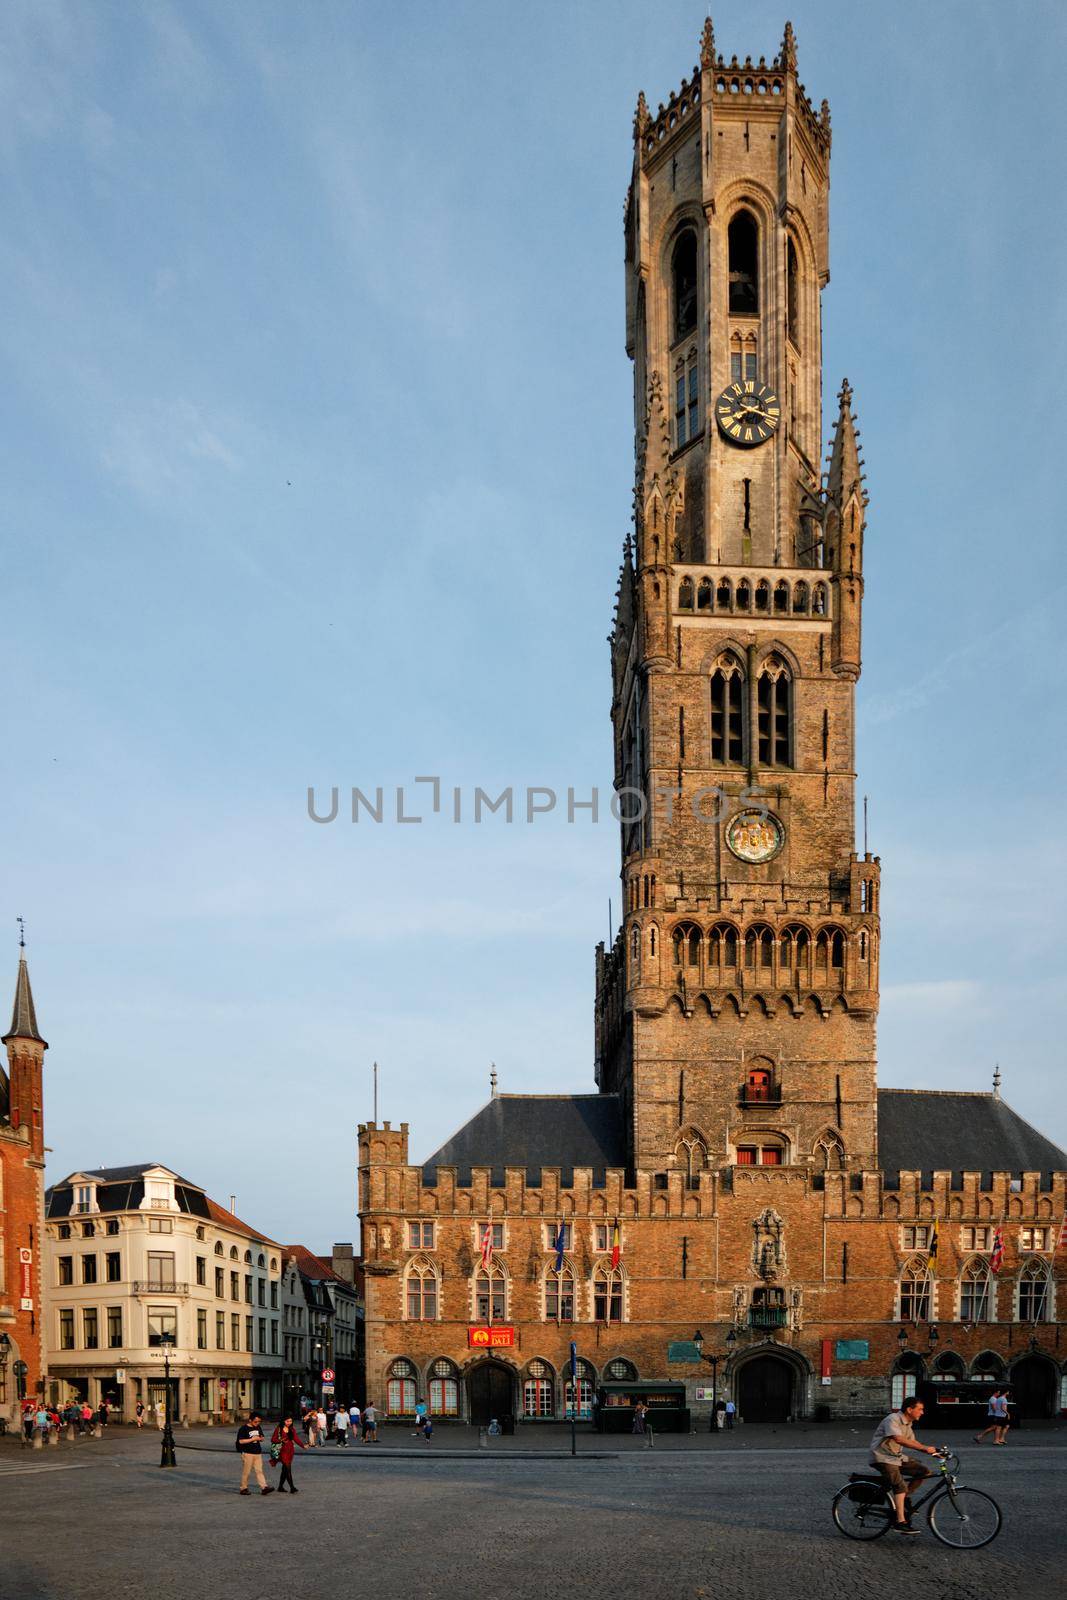 BRUGES, BELGIUM - MAY 28, 2018: Belfry tower famous tourist destination and Grote markt square in Bruges, Belgium with pedestrians and bicycle on sunset